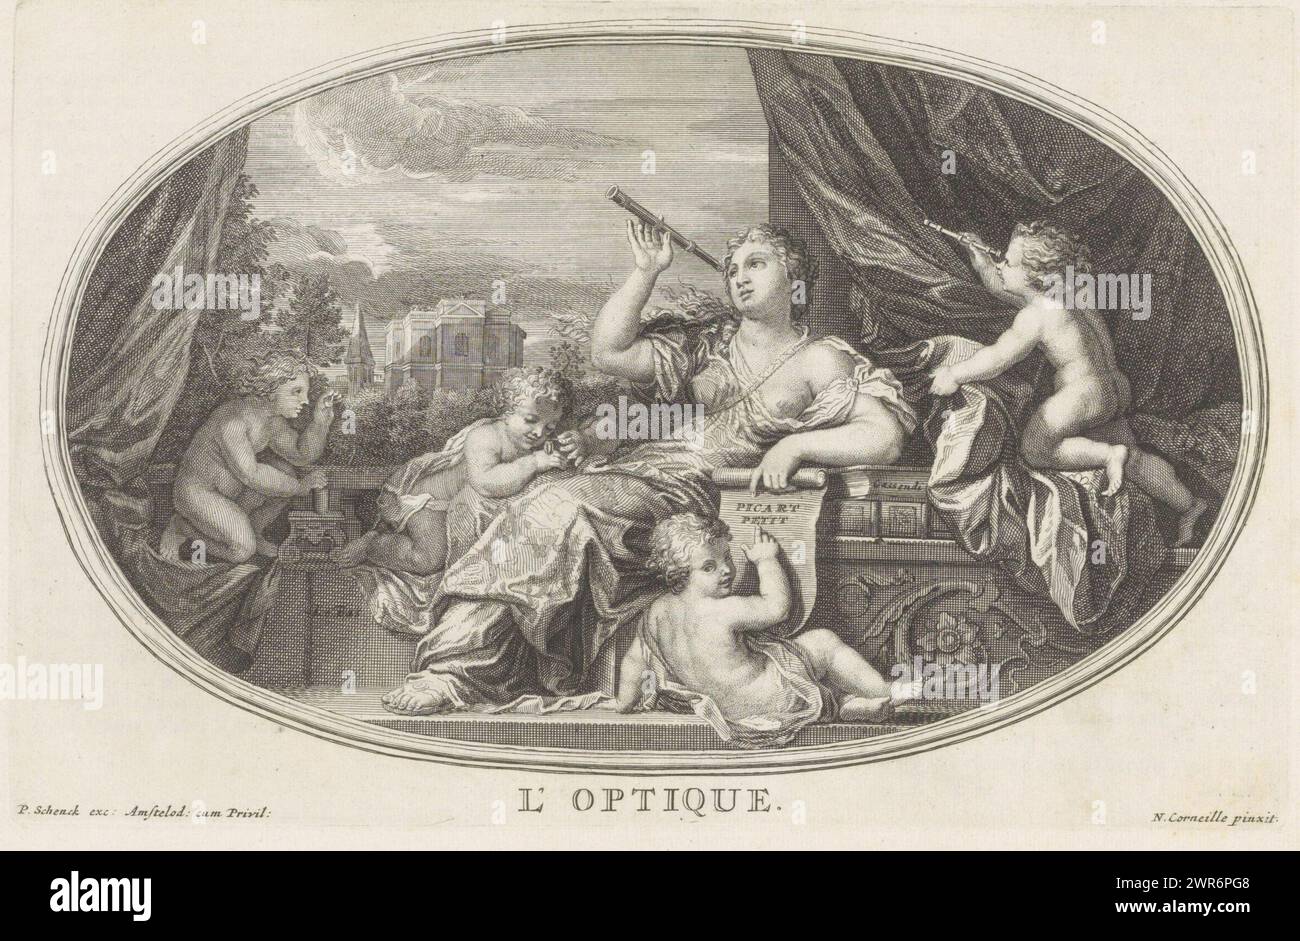 Vision, L´Optique (title on object), Le Cabinet des Beaux Arts (...) / De Schatkamer der Vrye Konsten (...) (series title), Ceiling piece with the personification of Vision. She looks at the sky through a stargazer. Next to her is a putto who also looks through a stargazer or telescope. On the left two putti studying small objects. In the background the Versailles Observatory. Print is part of an album., print maker: Pieter Sluyter, after print by: Charles Louis Simonneau, after painting by: Michel Corneille (II), Amsterdam, 1693, paper, etching, engraving, height 170 mm × width 263 mm Stock Photo